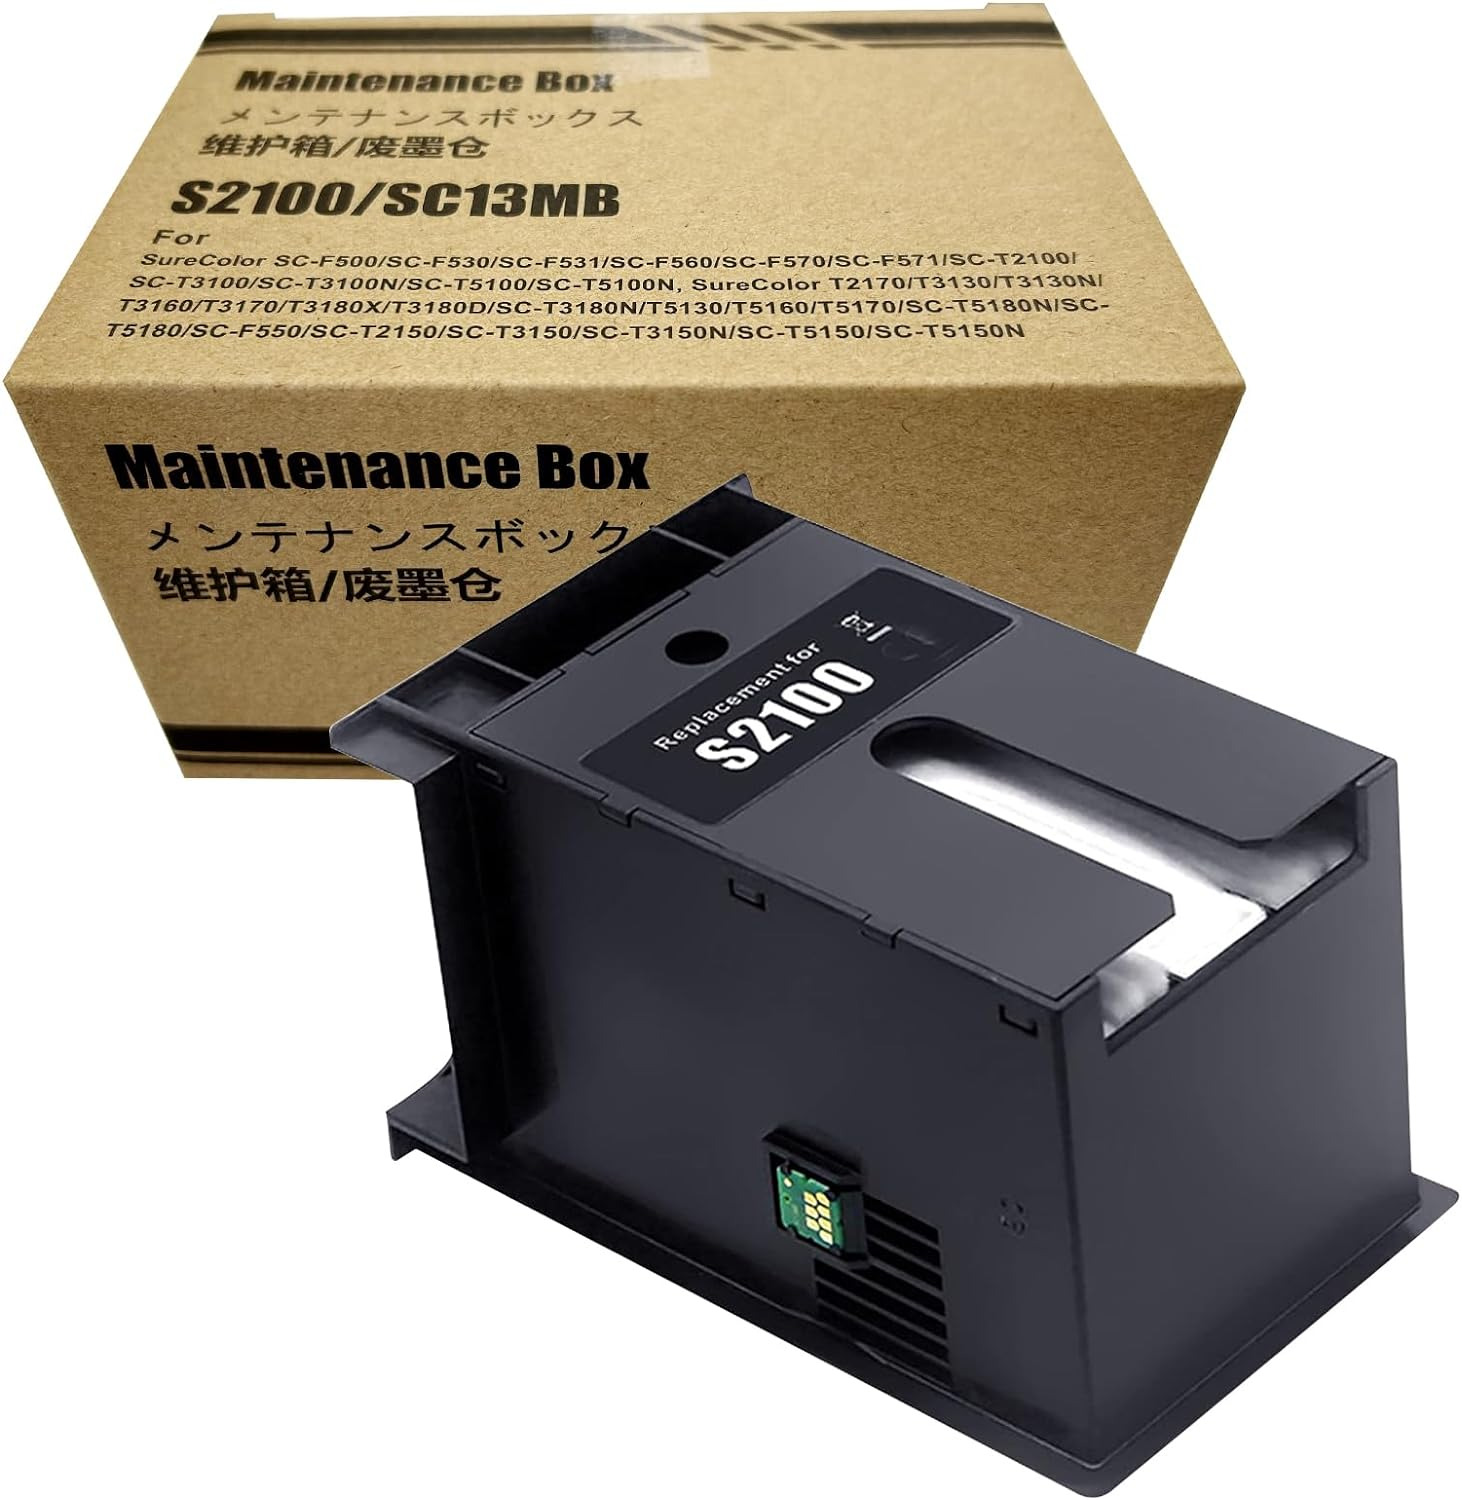 Ink Maintenance Box Replacement for S2100 Waste Ink Tank,For Surecolor 